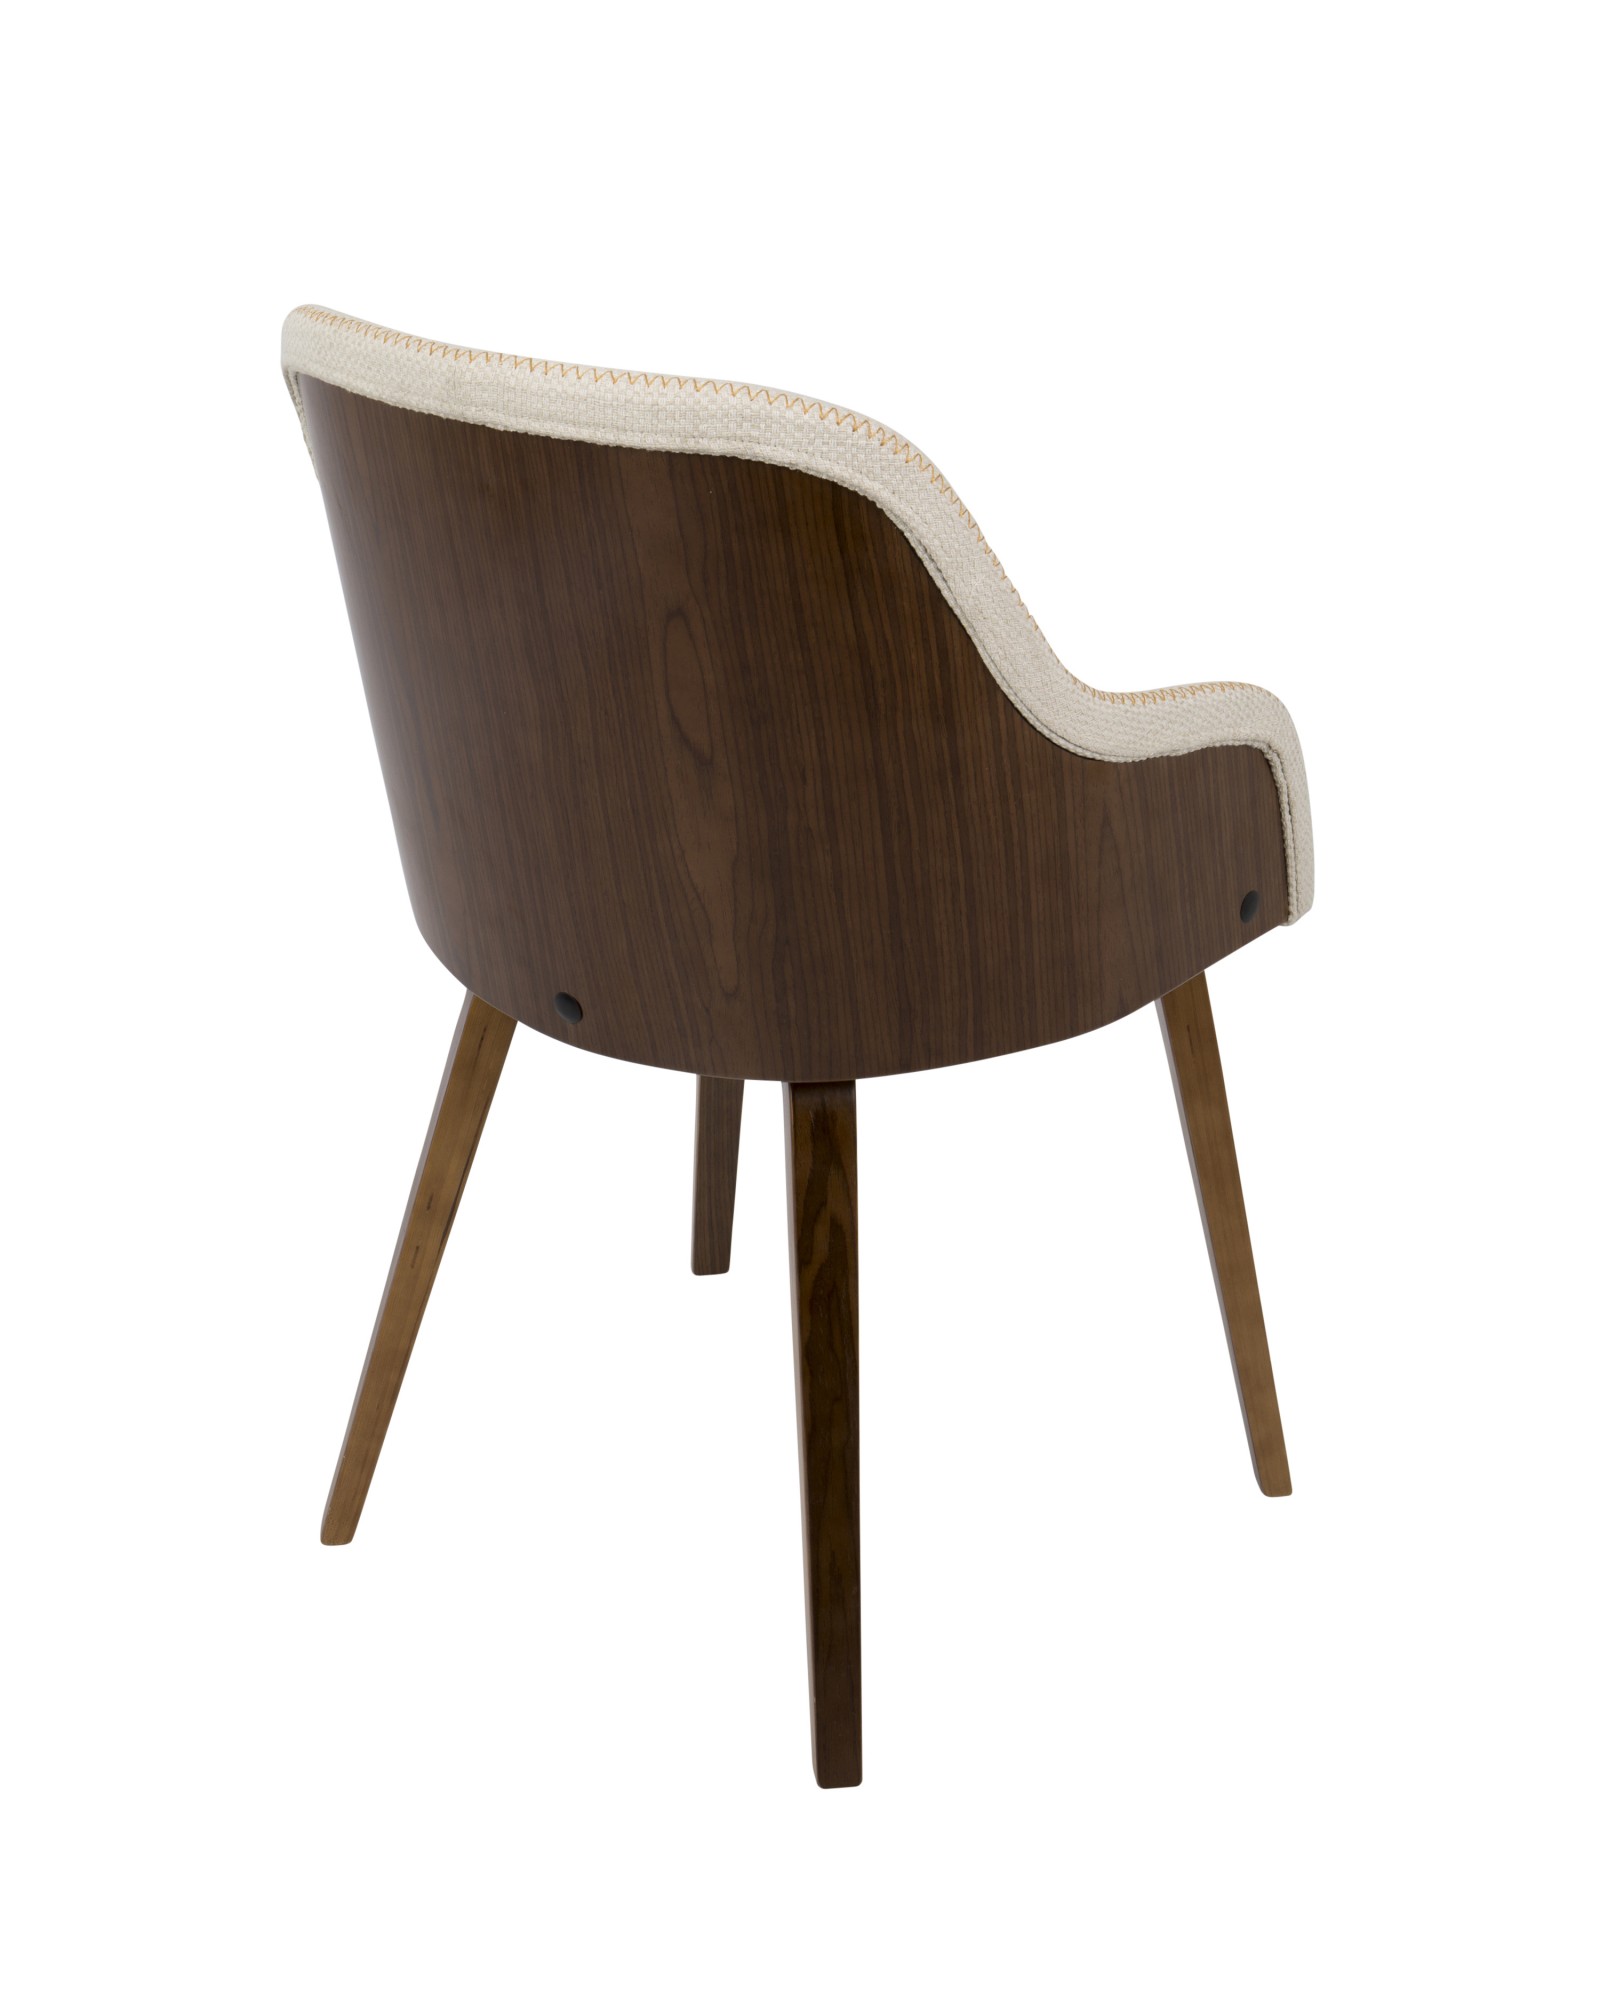 Bacci Mid-Century Modern Dining/ Accent Chair in Walnut Wood and Cream Fabric